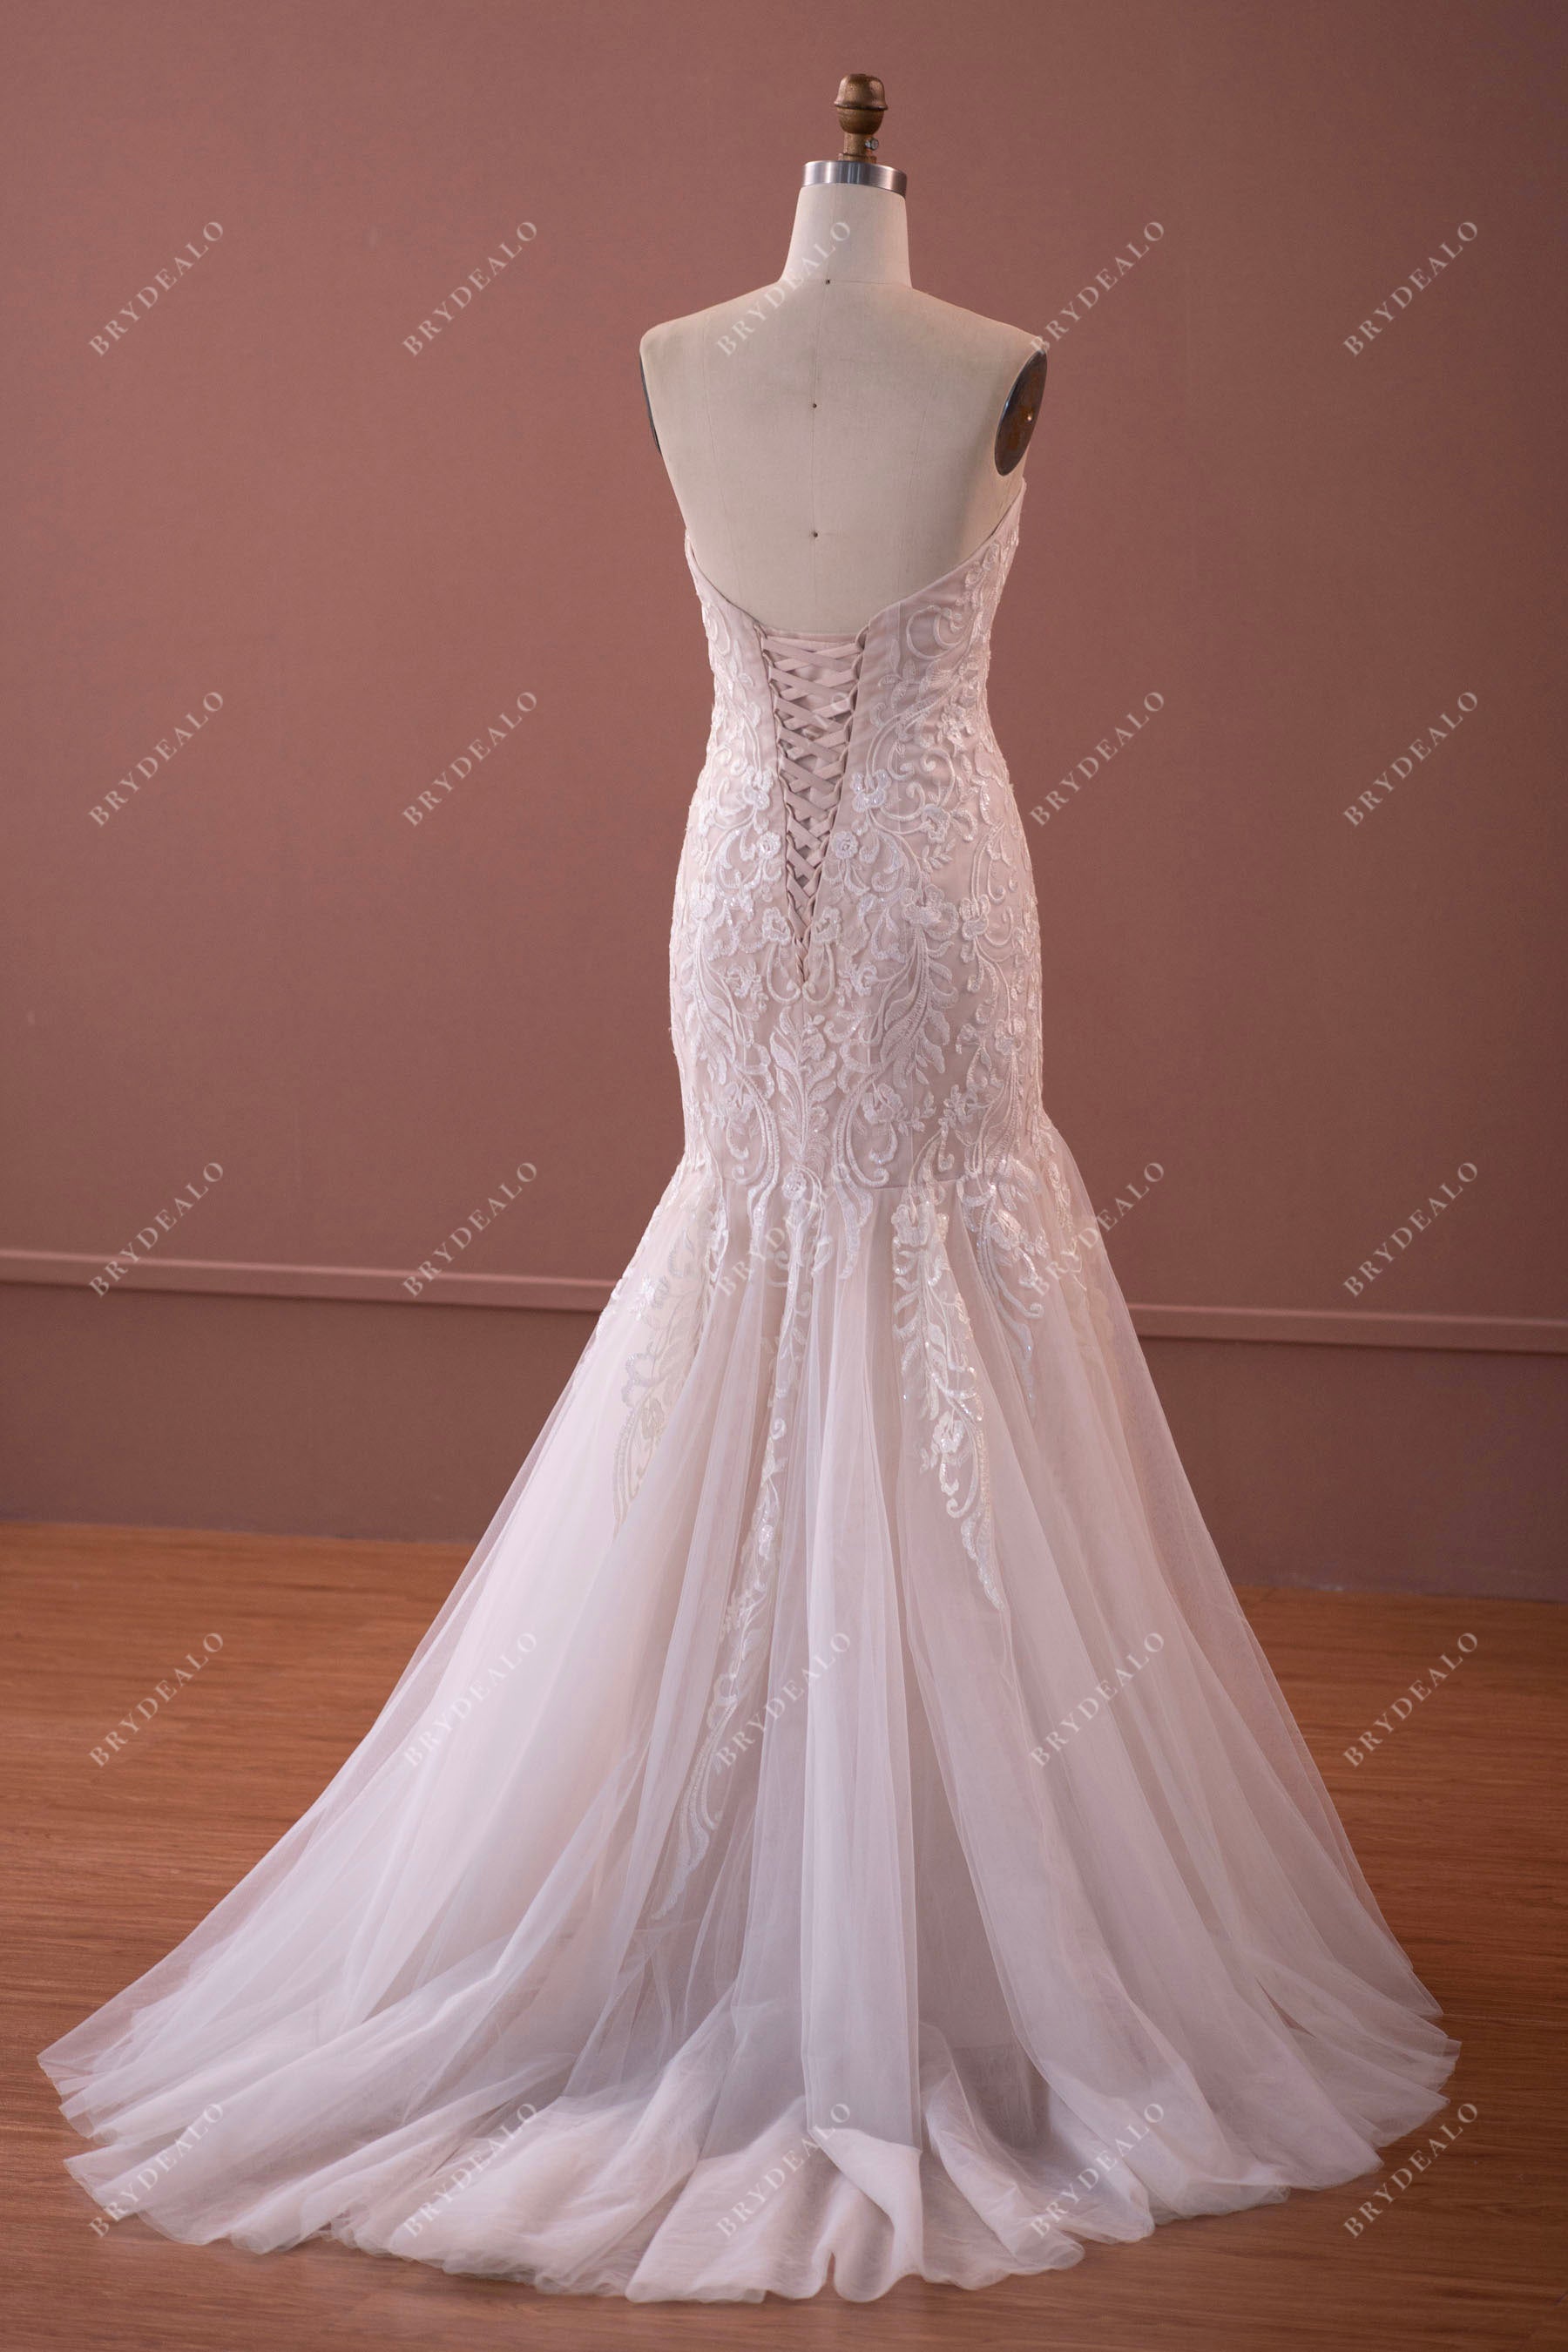 wholesale strapless mermaid wedding dress with lace up back